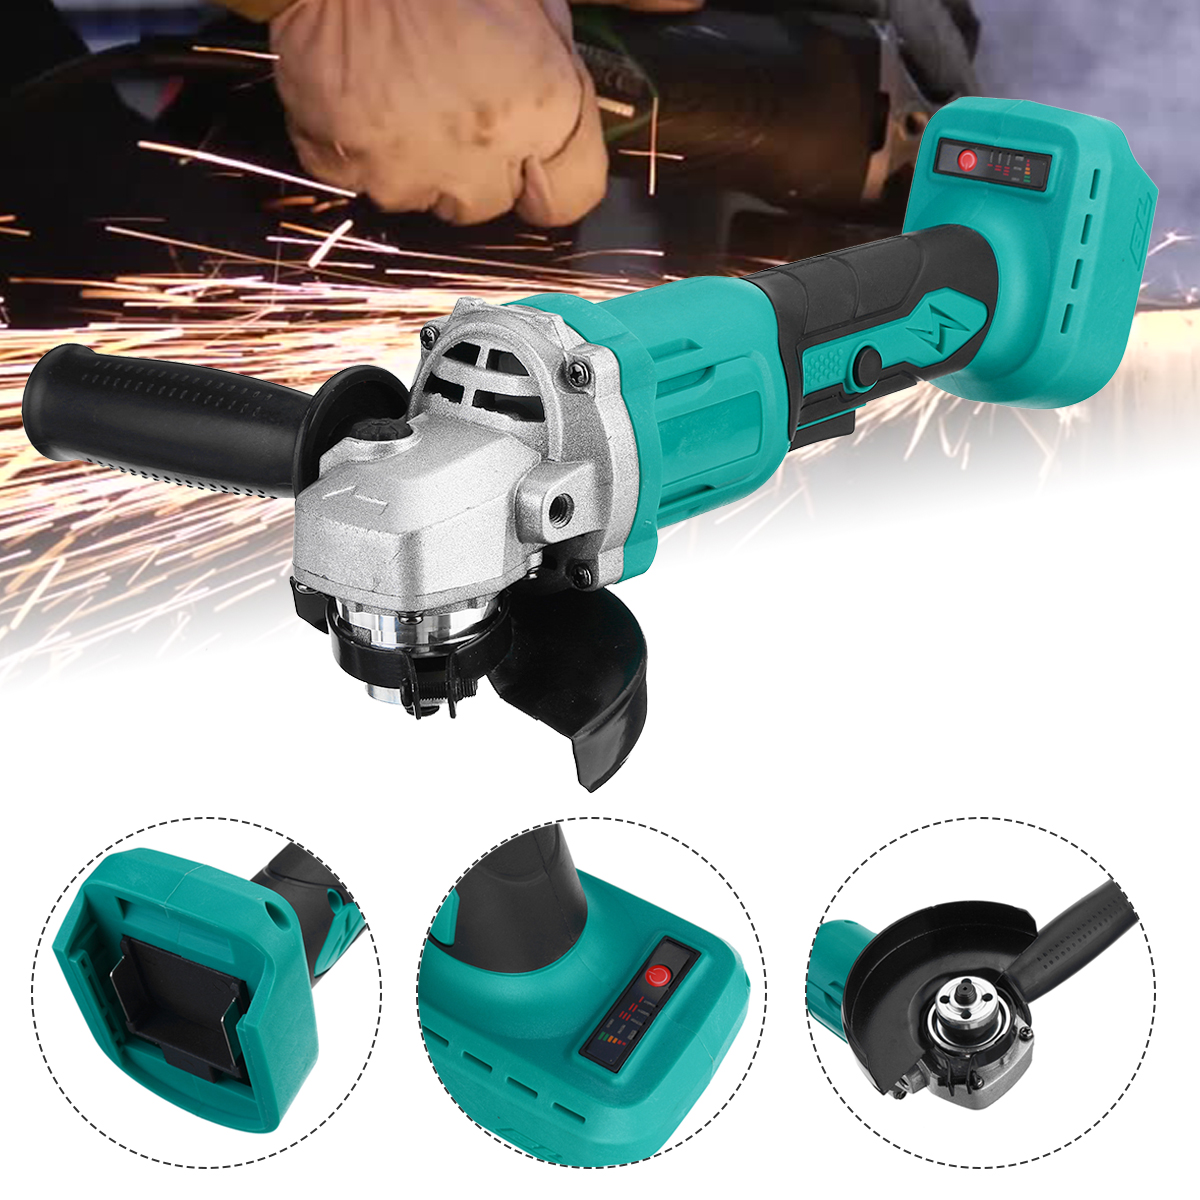 100mm-Brushless-Electric-Angle-Grinder-Grinding-Machine-Cordless-DIY-Woodworking-Power-Tool-1764625-4